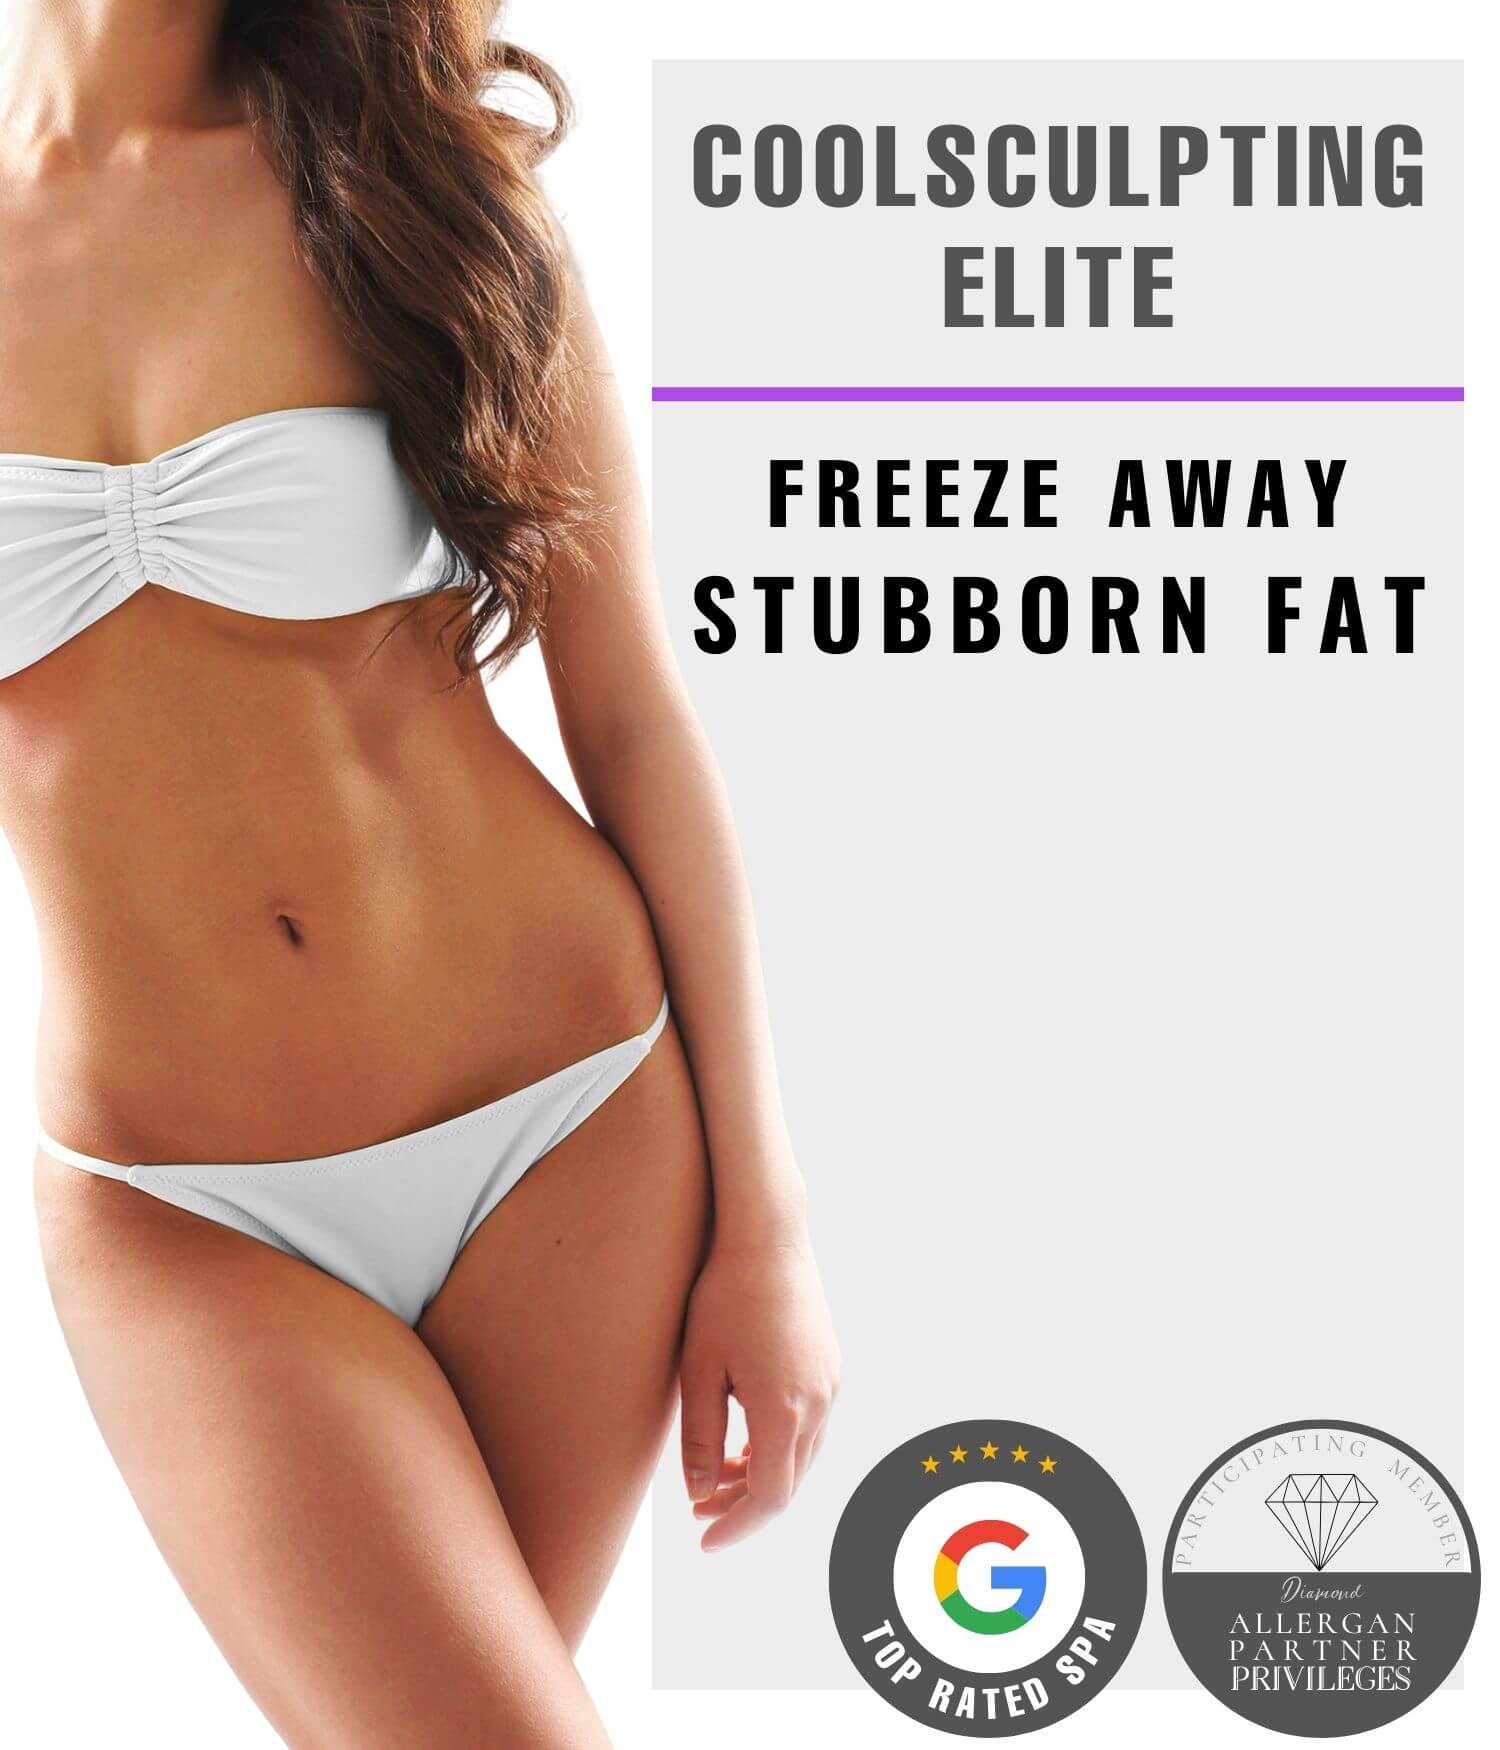 CoolSculpting for Bra & Back Fat - Benefits, Costs, Results